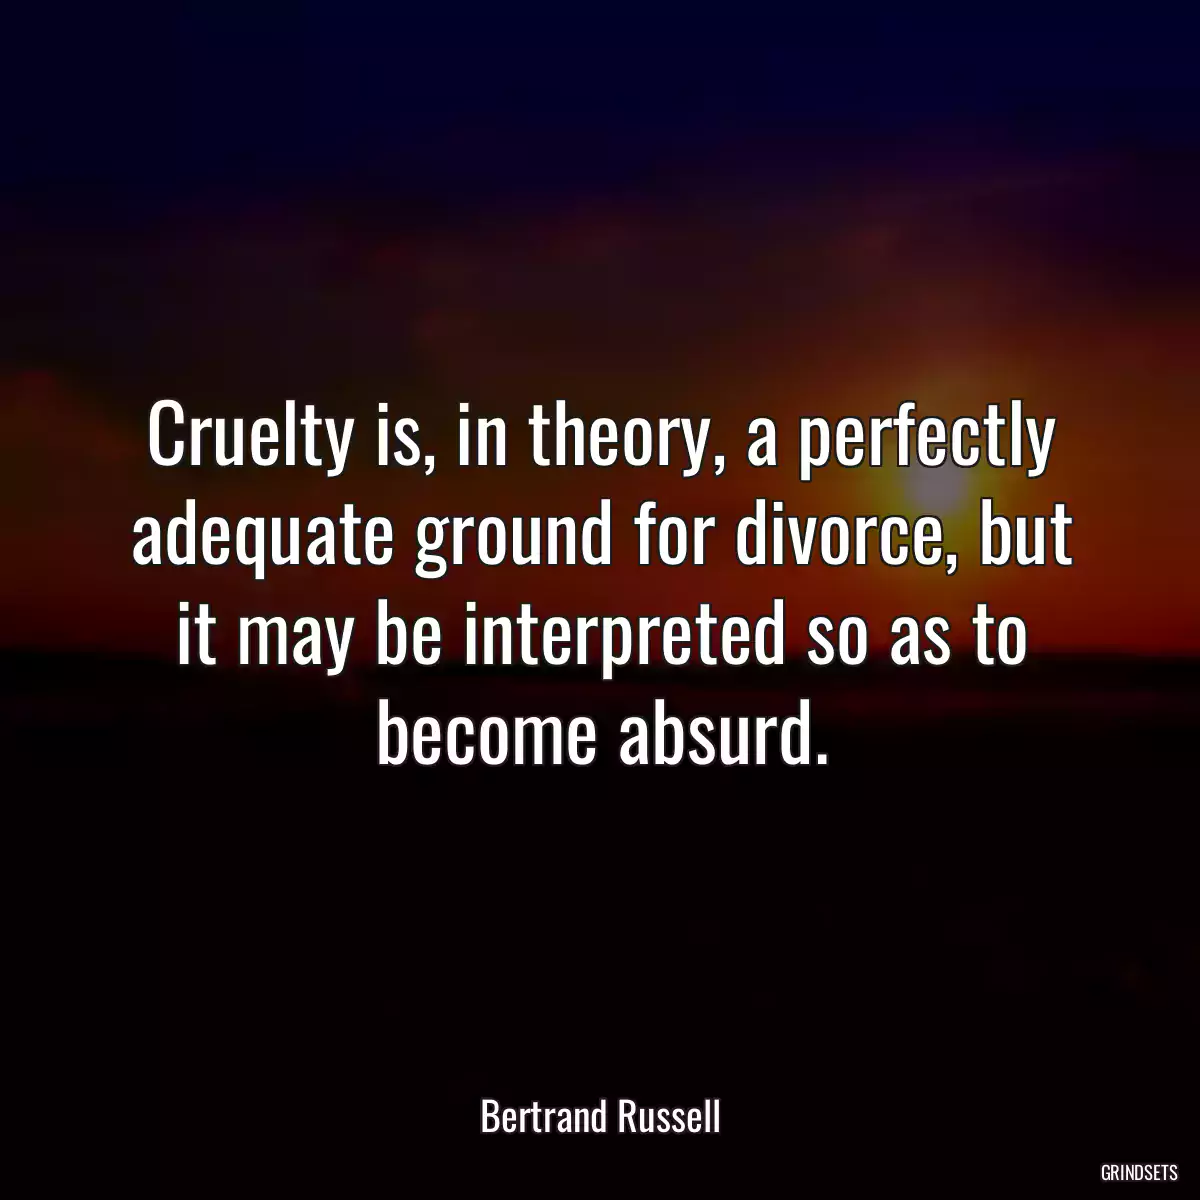 Cruelty is, in theory, a perfectly adequate ground for divorce, but it may be interpreted so as to become absurd.